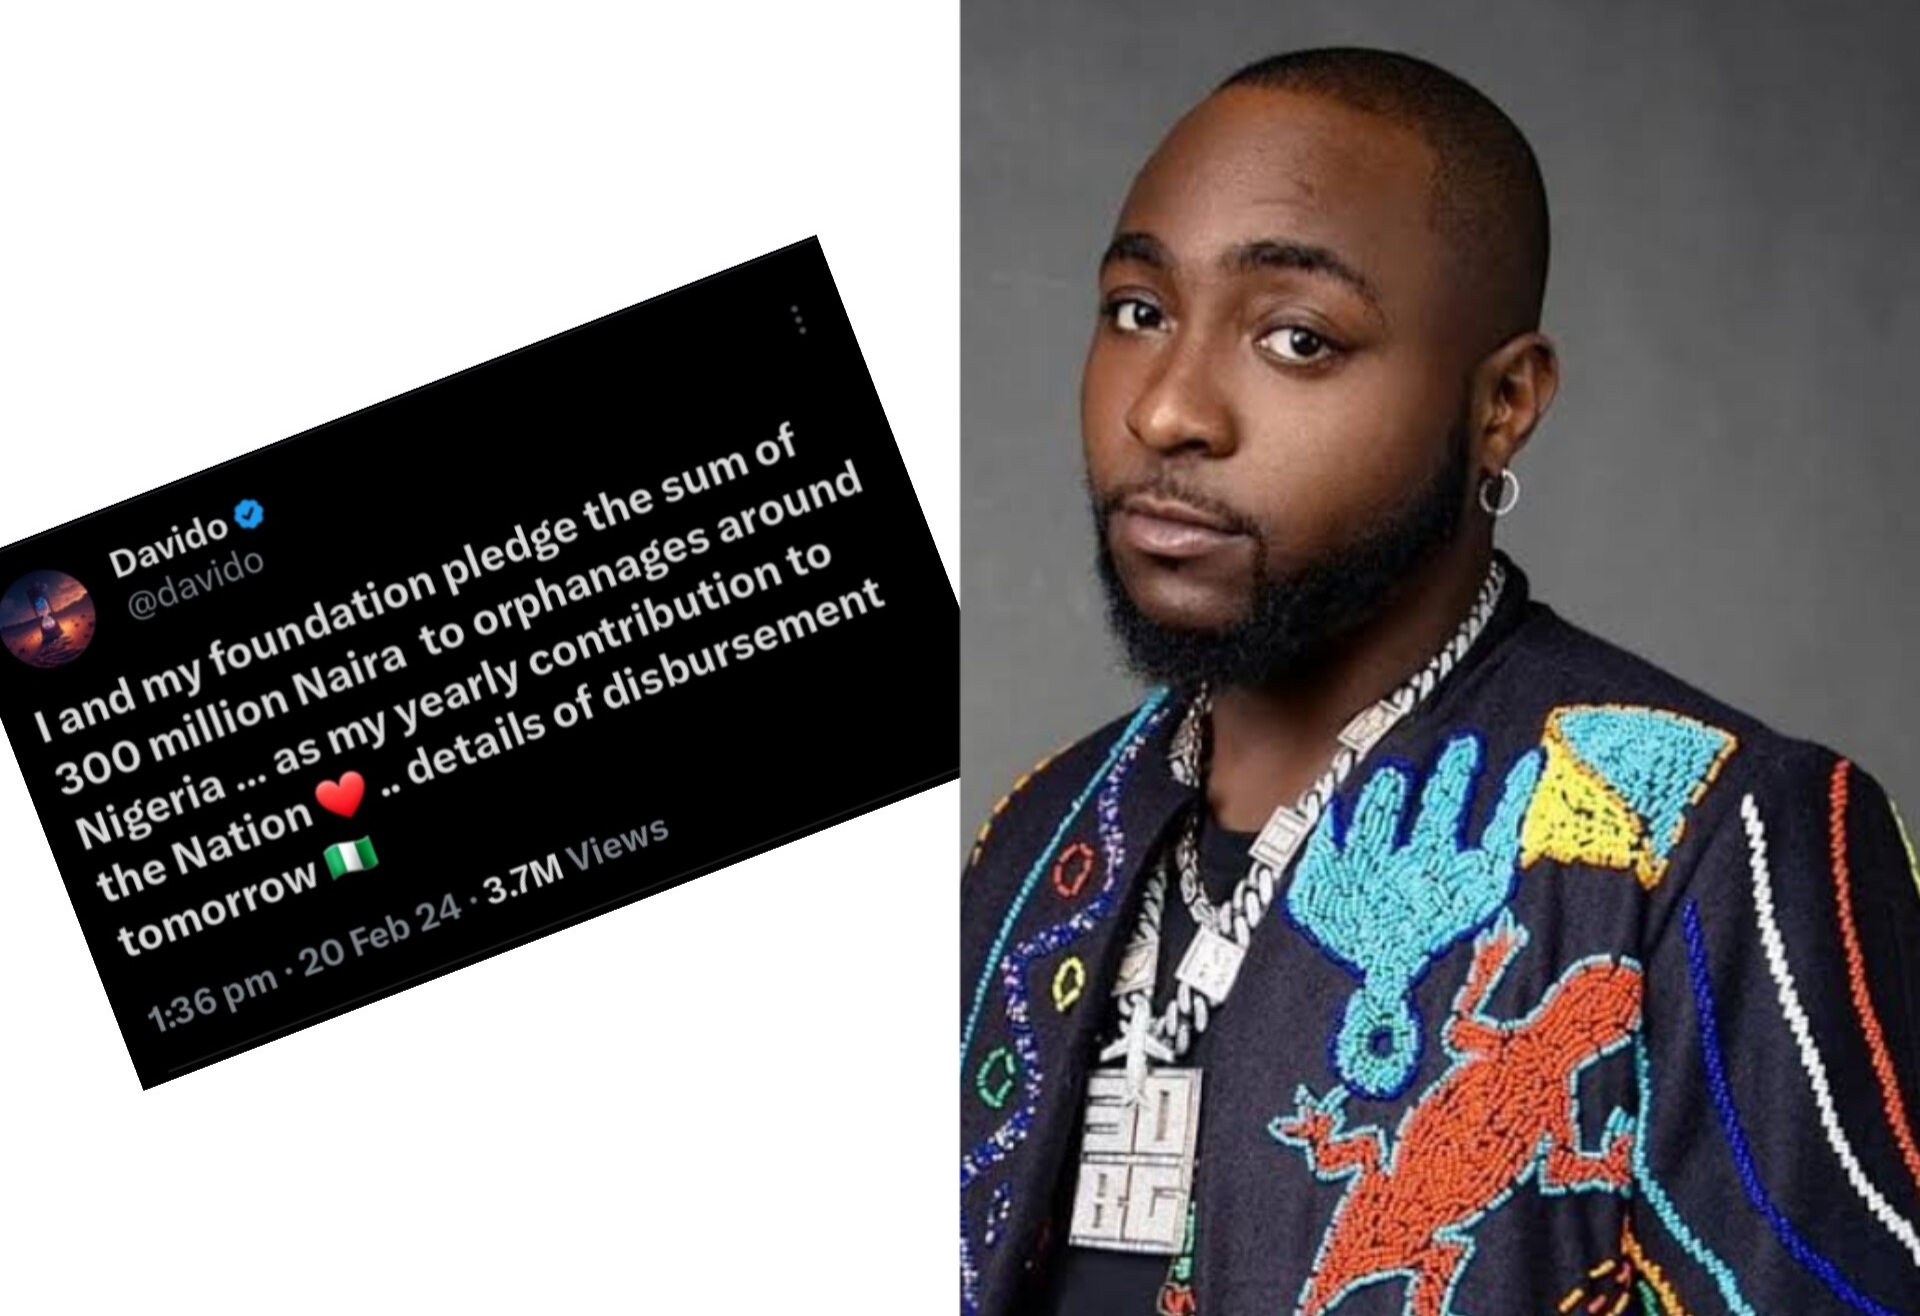 Davido fulfills his promise by donating 300 million Naira to an orphanage, and the money has been transferred (Screenshot)